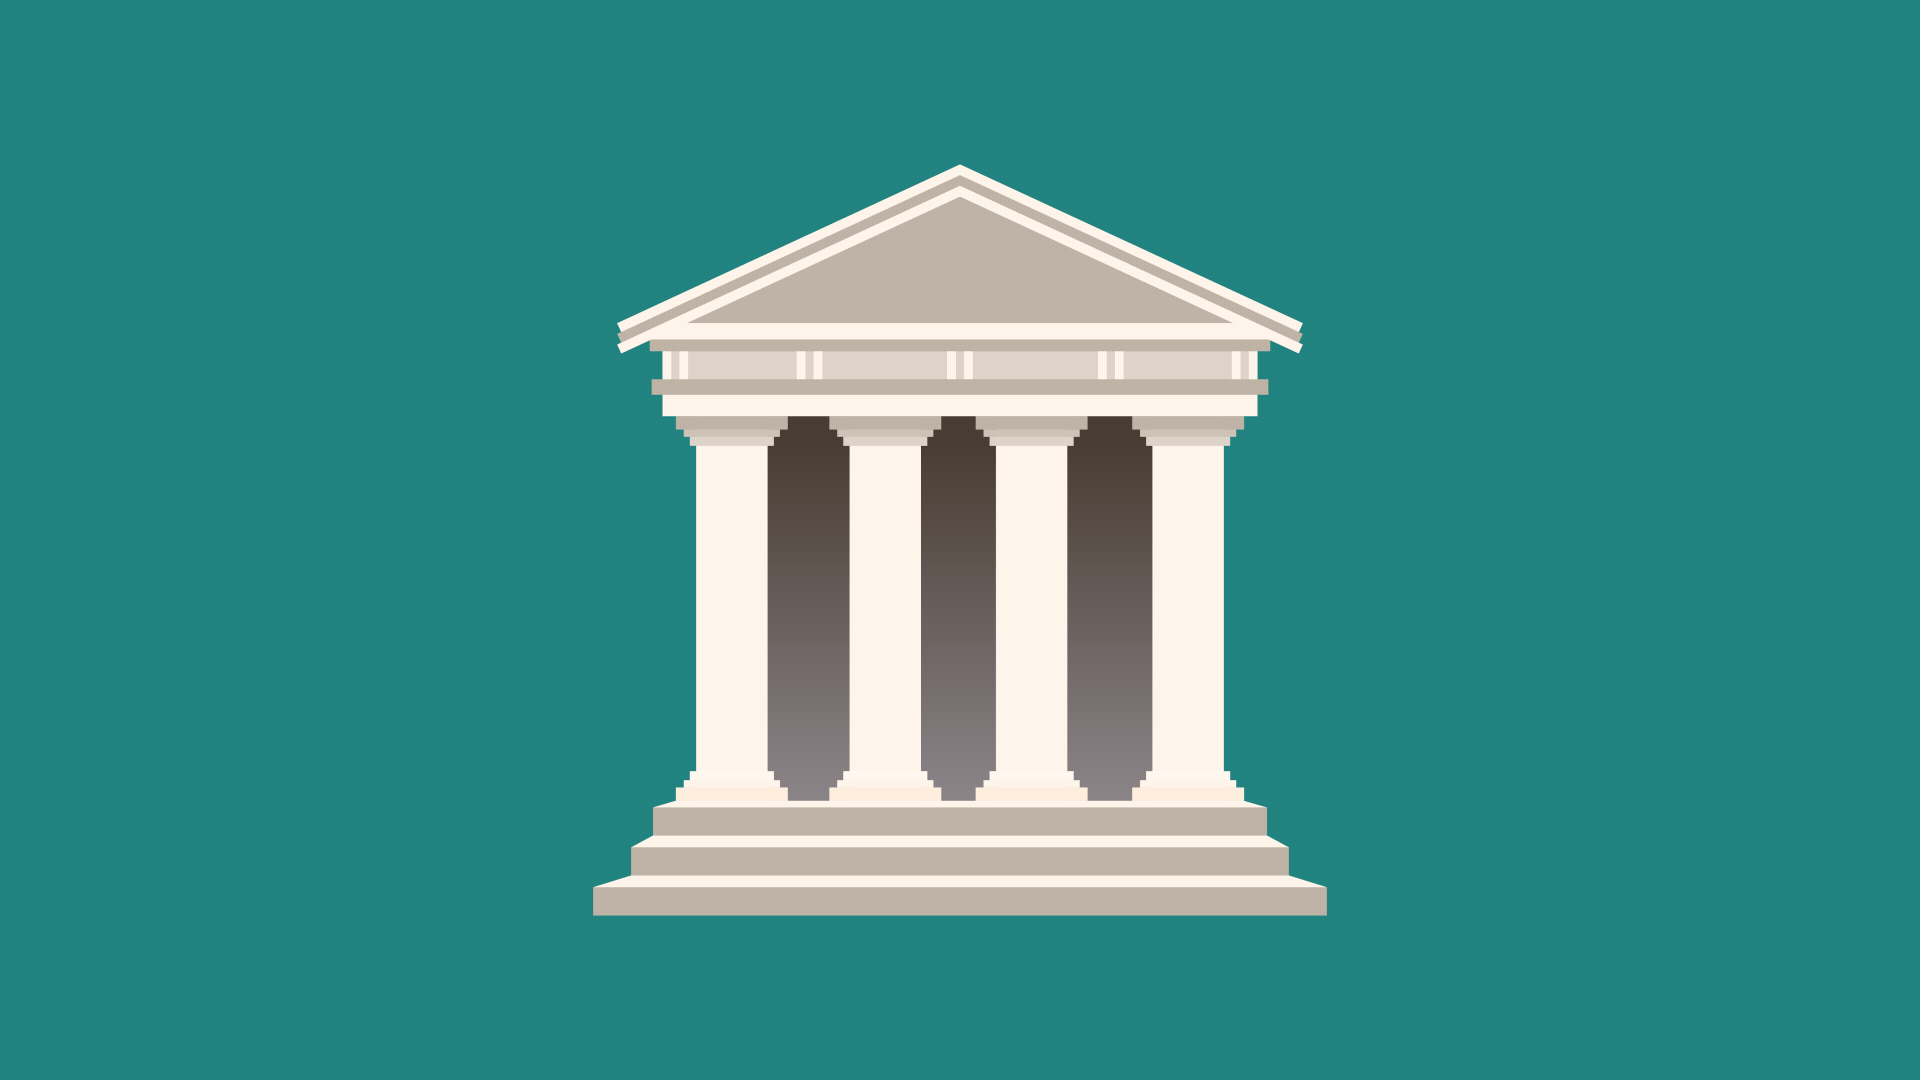 Illustration of the classical building emoji with an increasing number of notifications popping up over it.